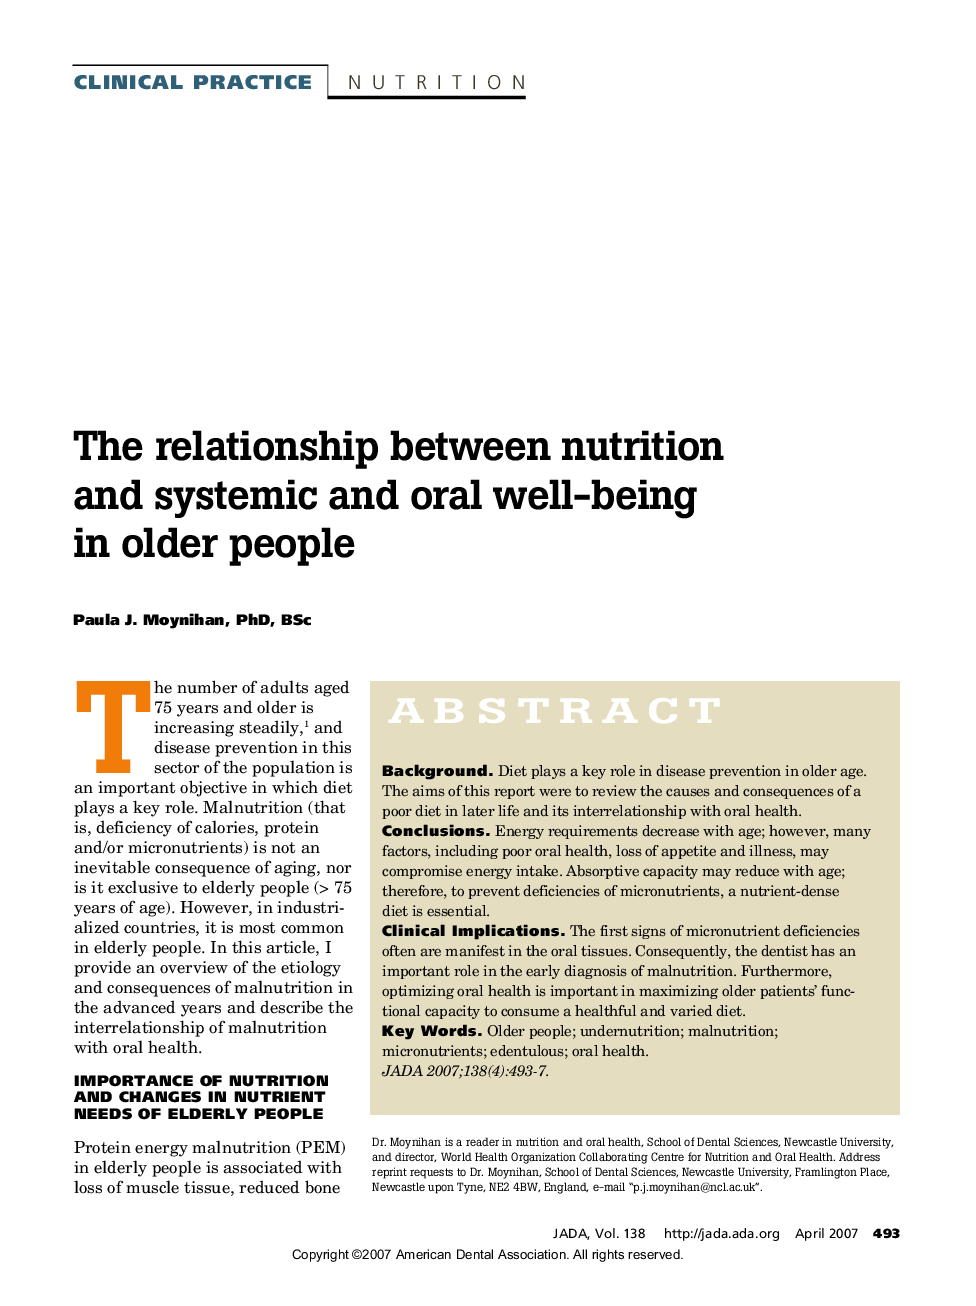 The relationship between nutrition and systemic and oral well-being in older people